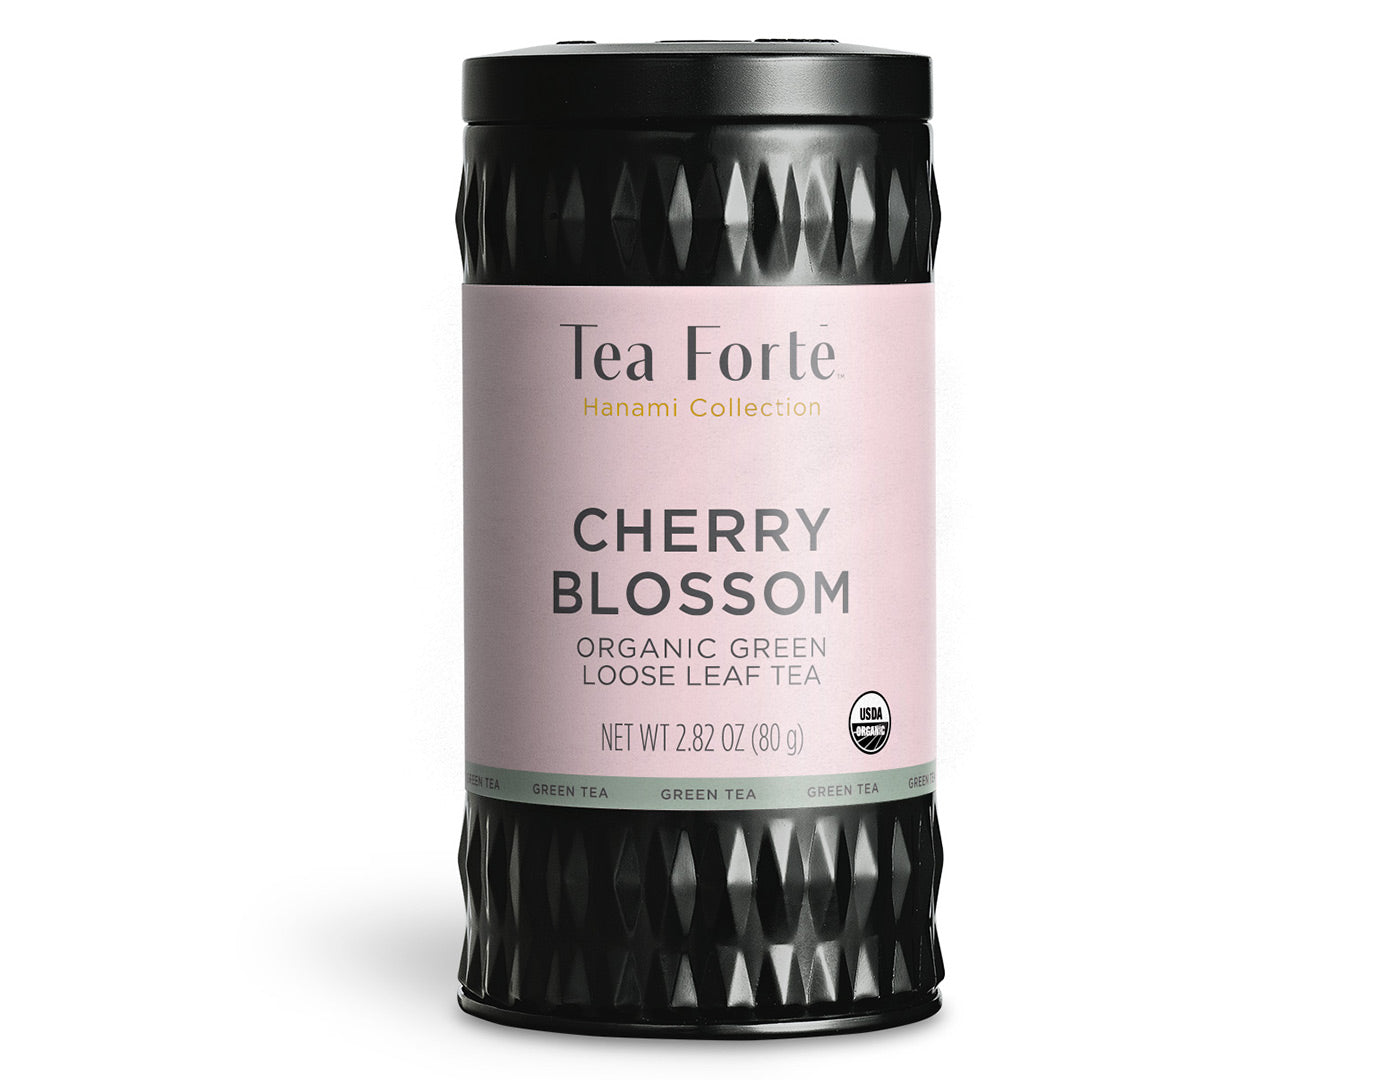 Cherry Blossom Hanami tea in a canister of loose tea